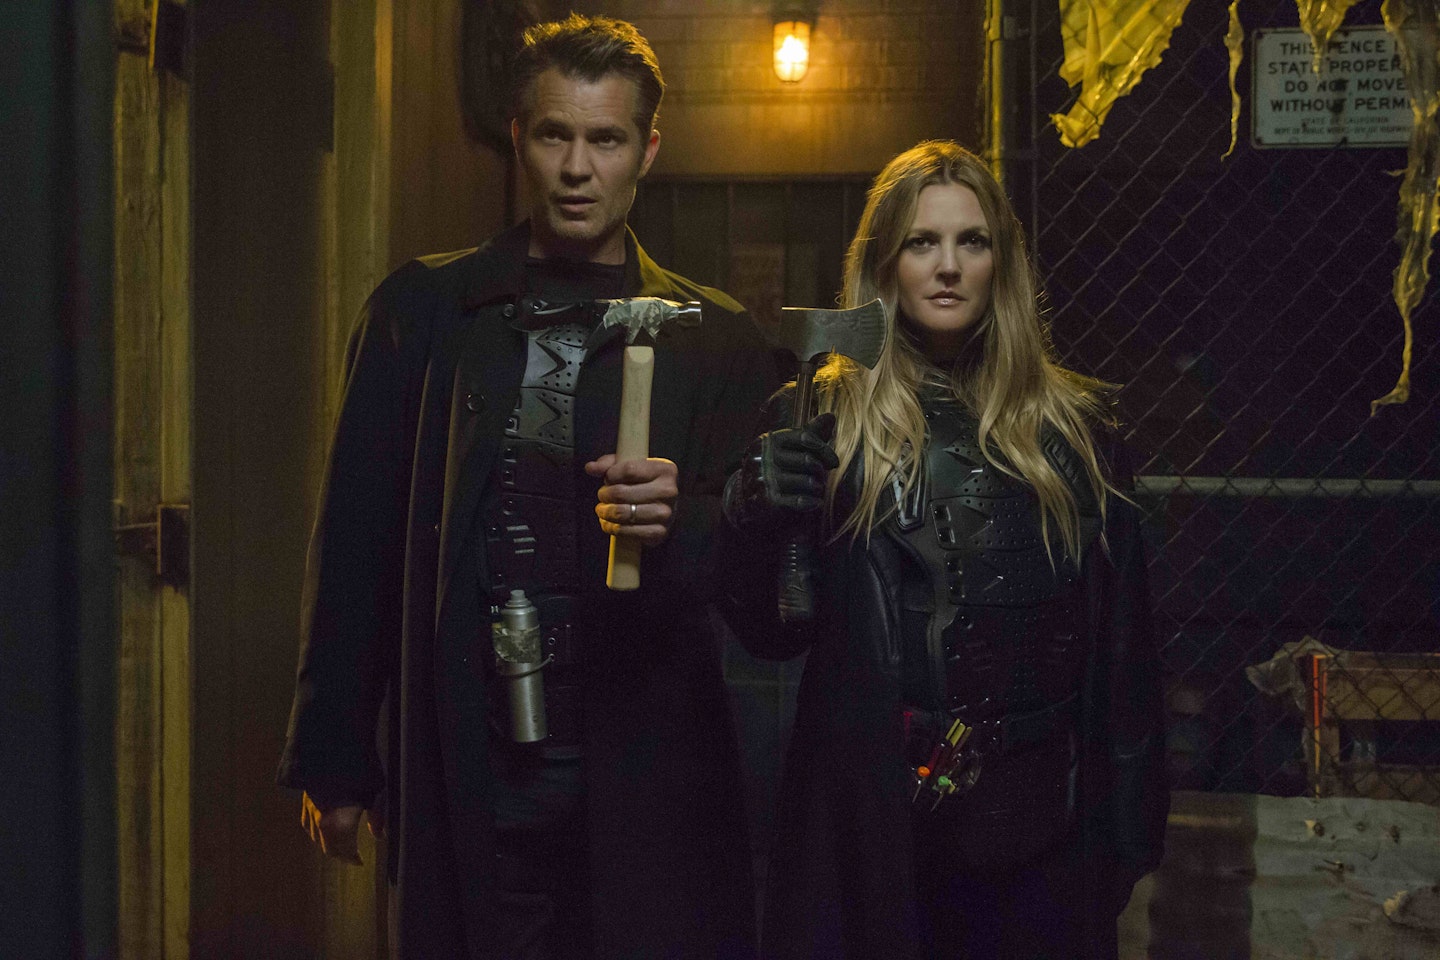 Timothy Olyphant and Drew Barrymore in Santa Clarita Diet